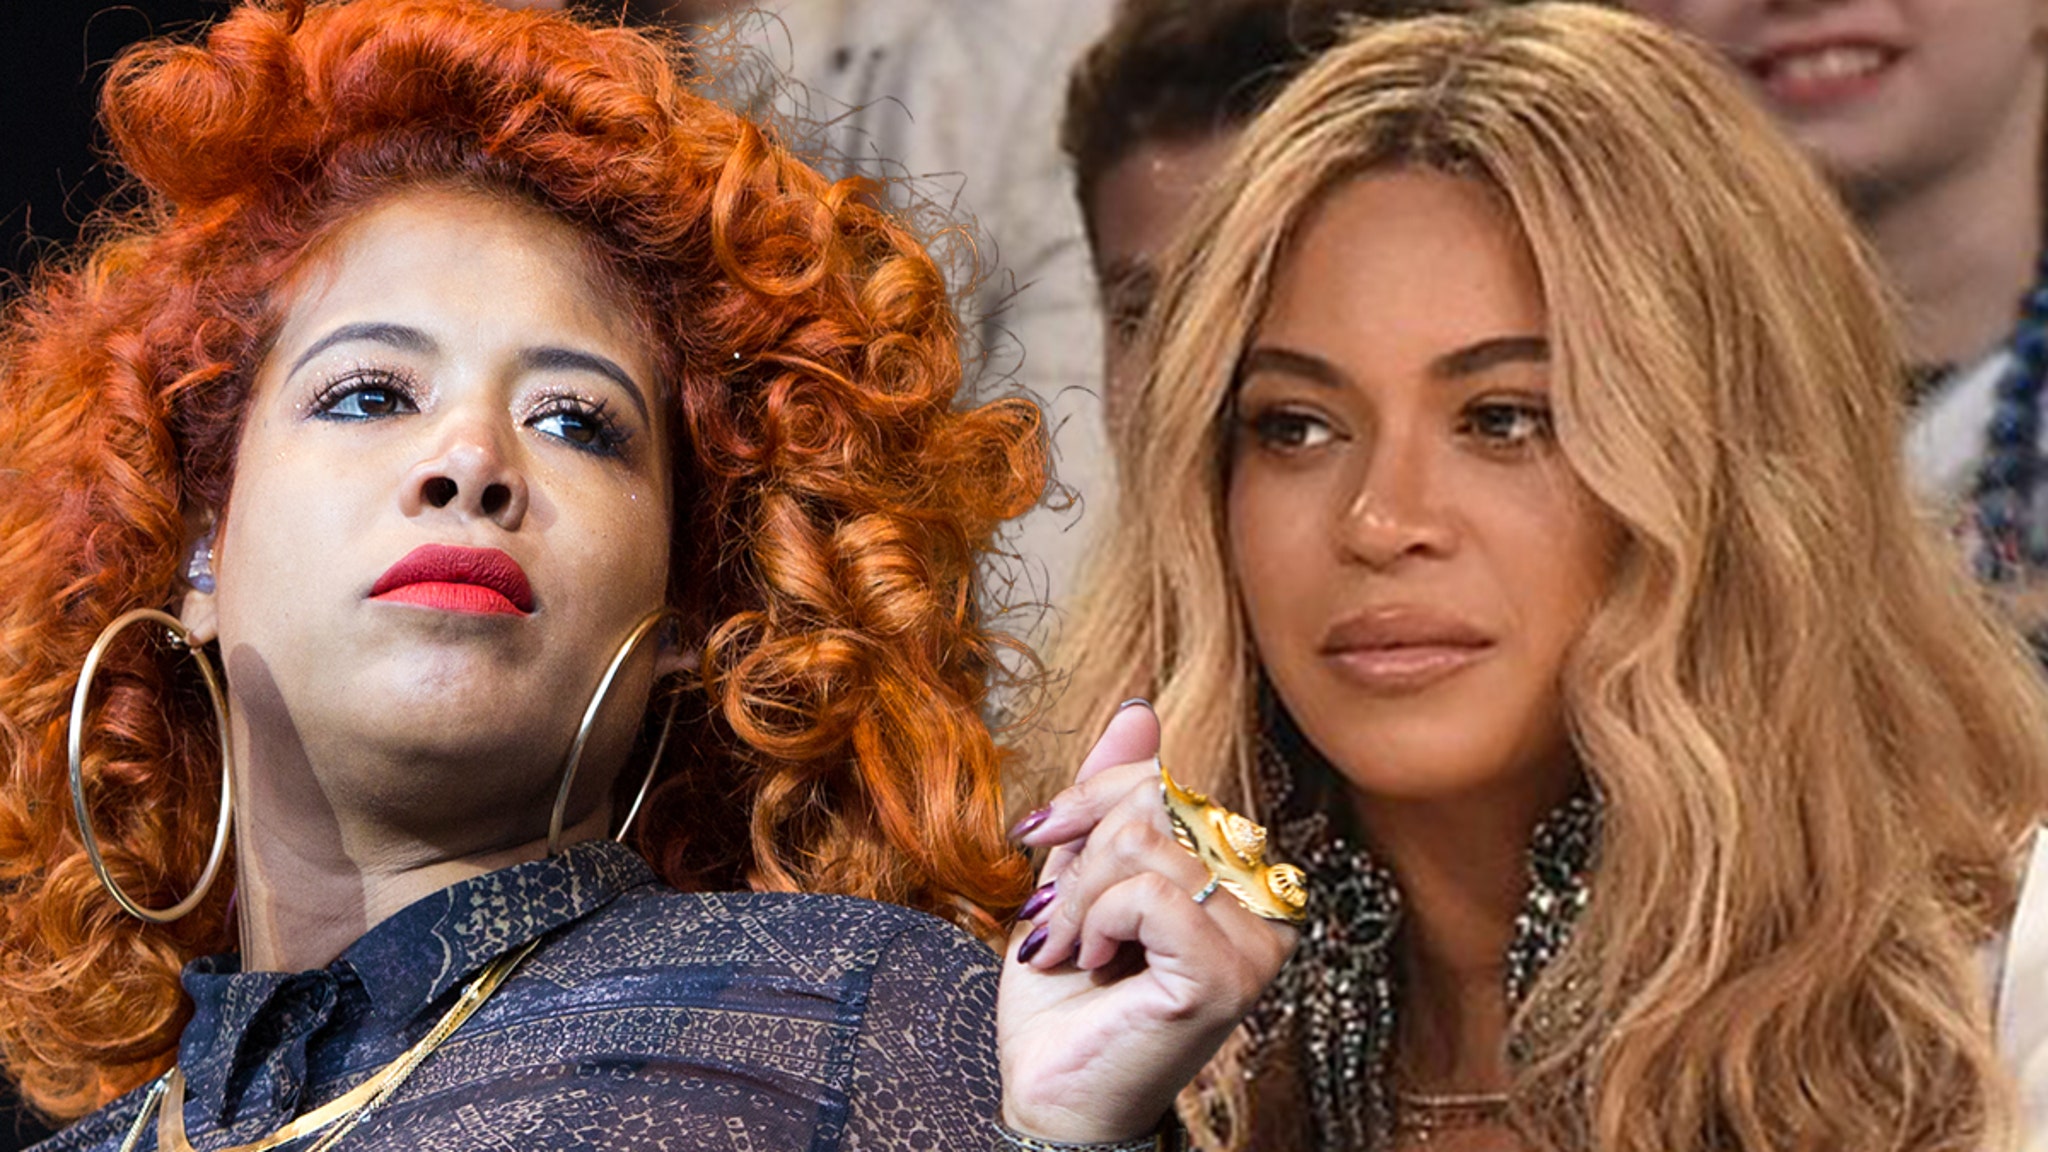 Beyoncé Fans Blame Kelis For Being More Crazy About Swatches Than Hair Game